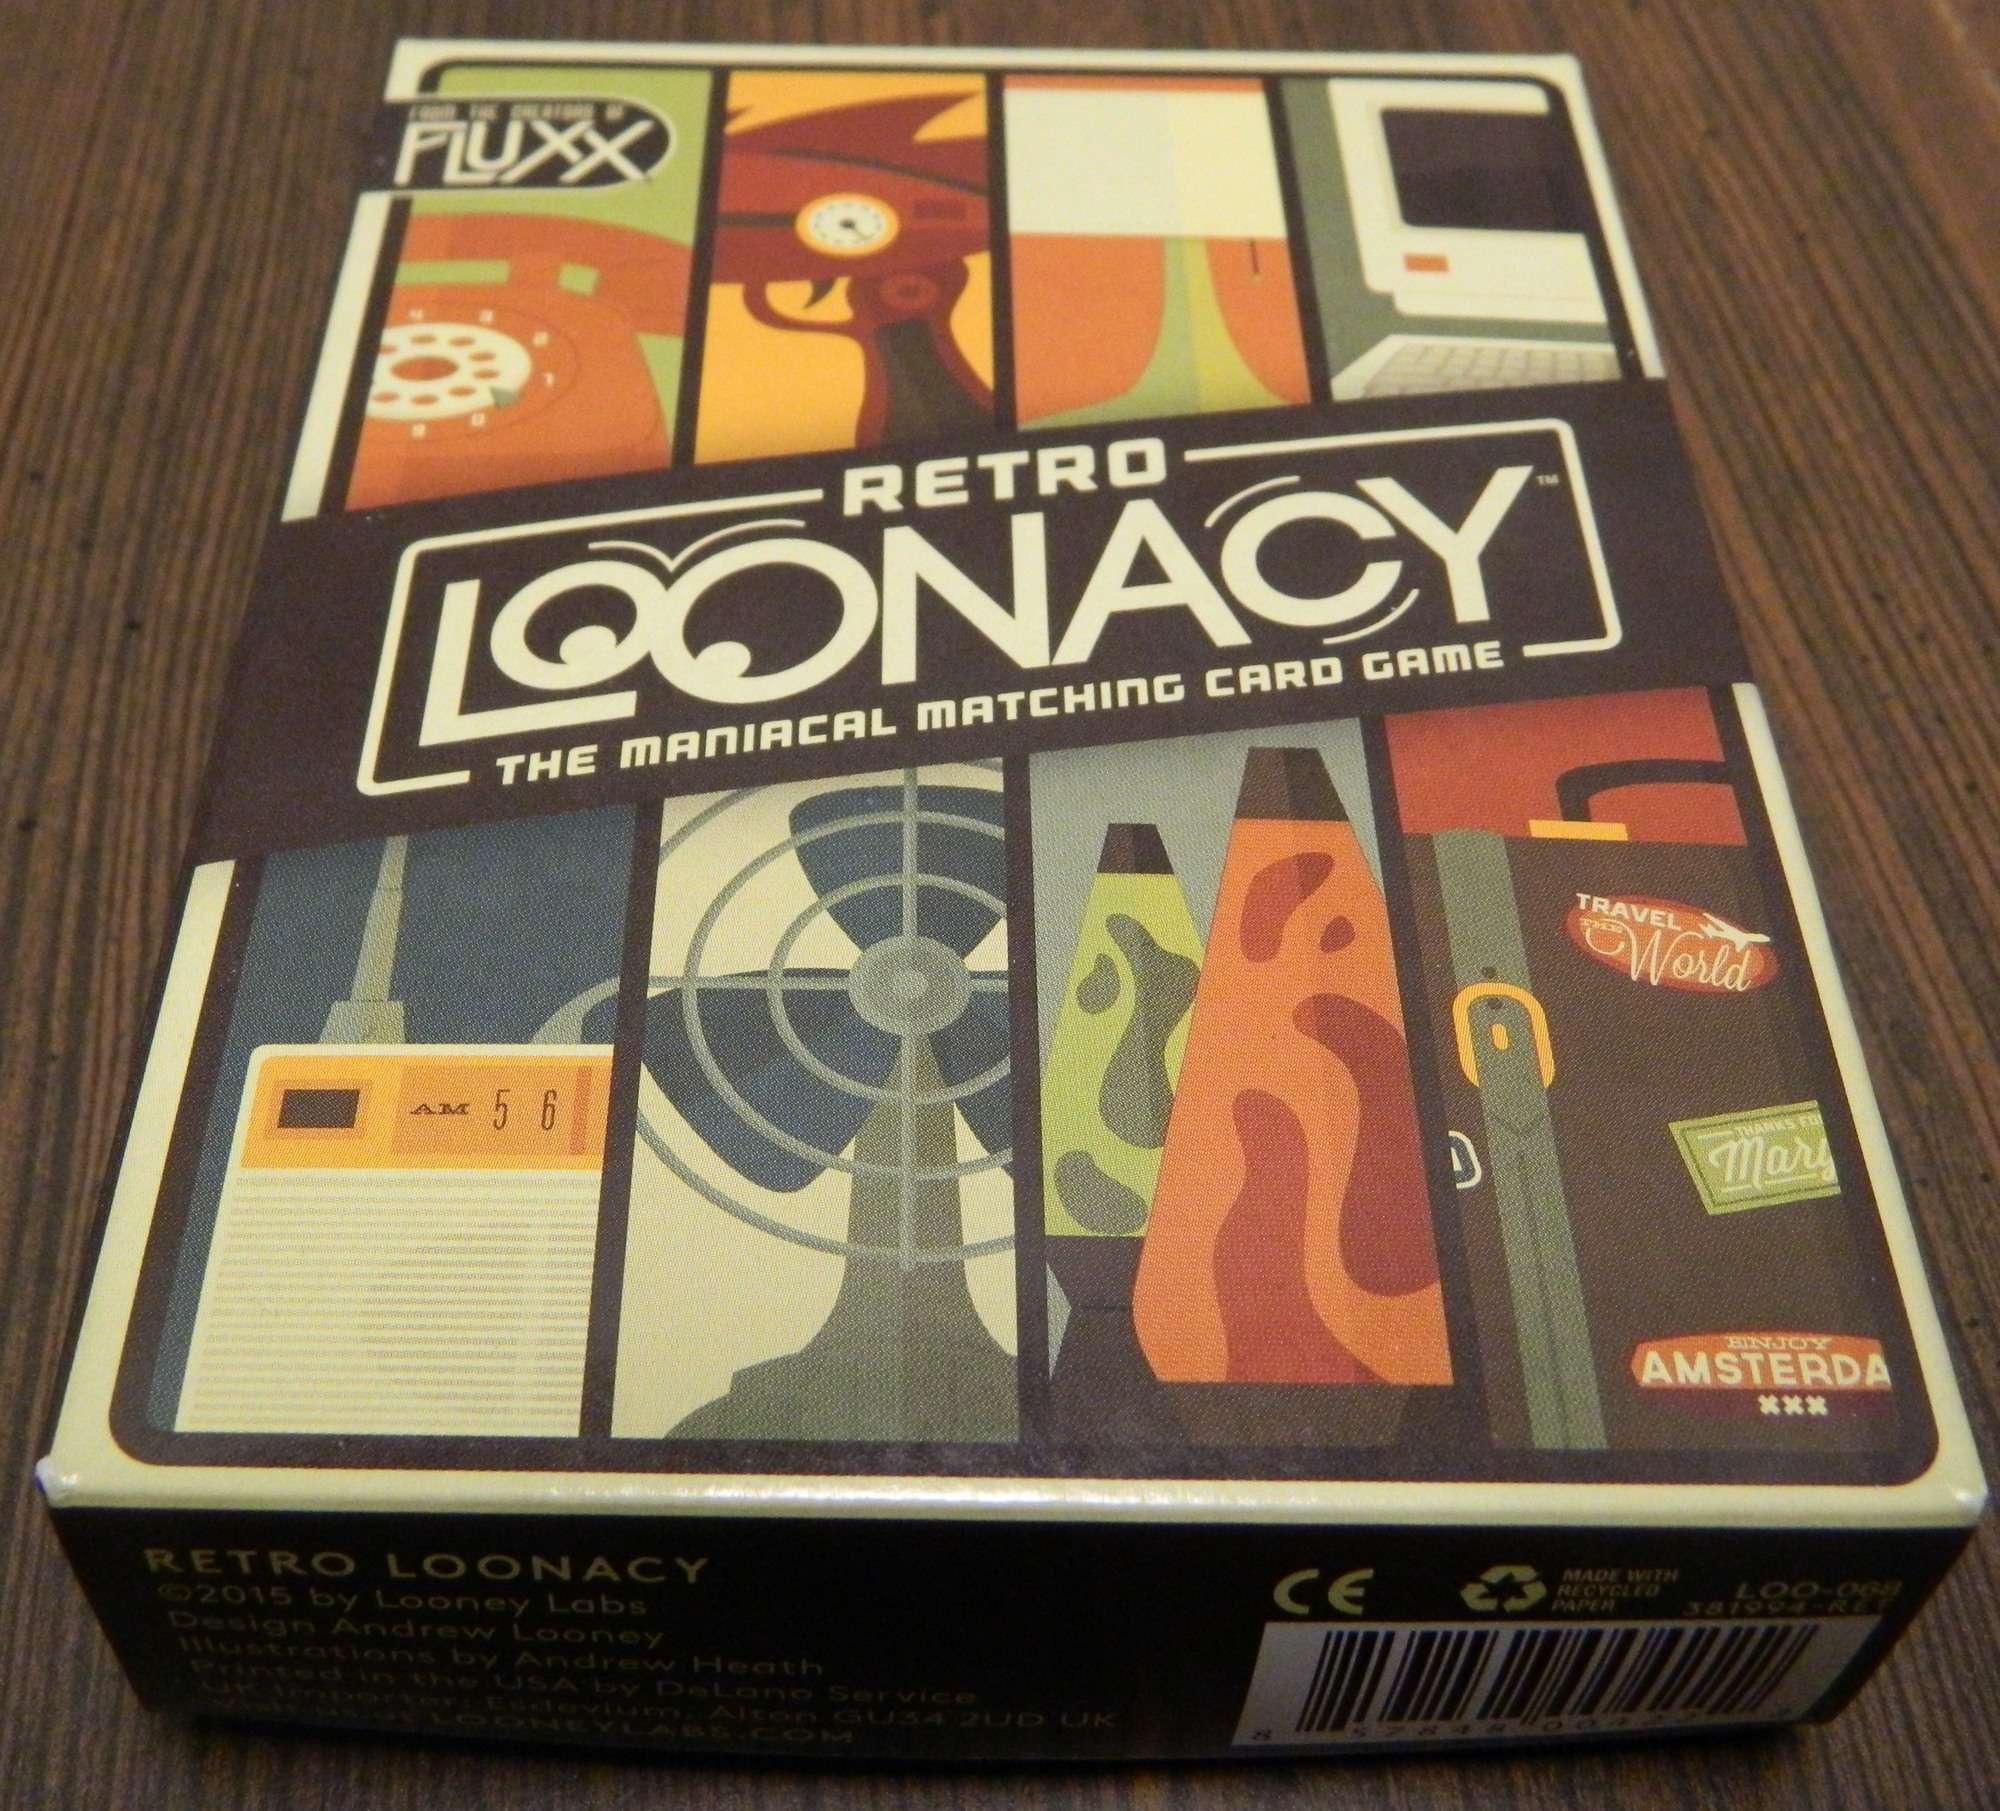 Retro Loonacy Card Game Review and Instructions